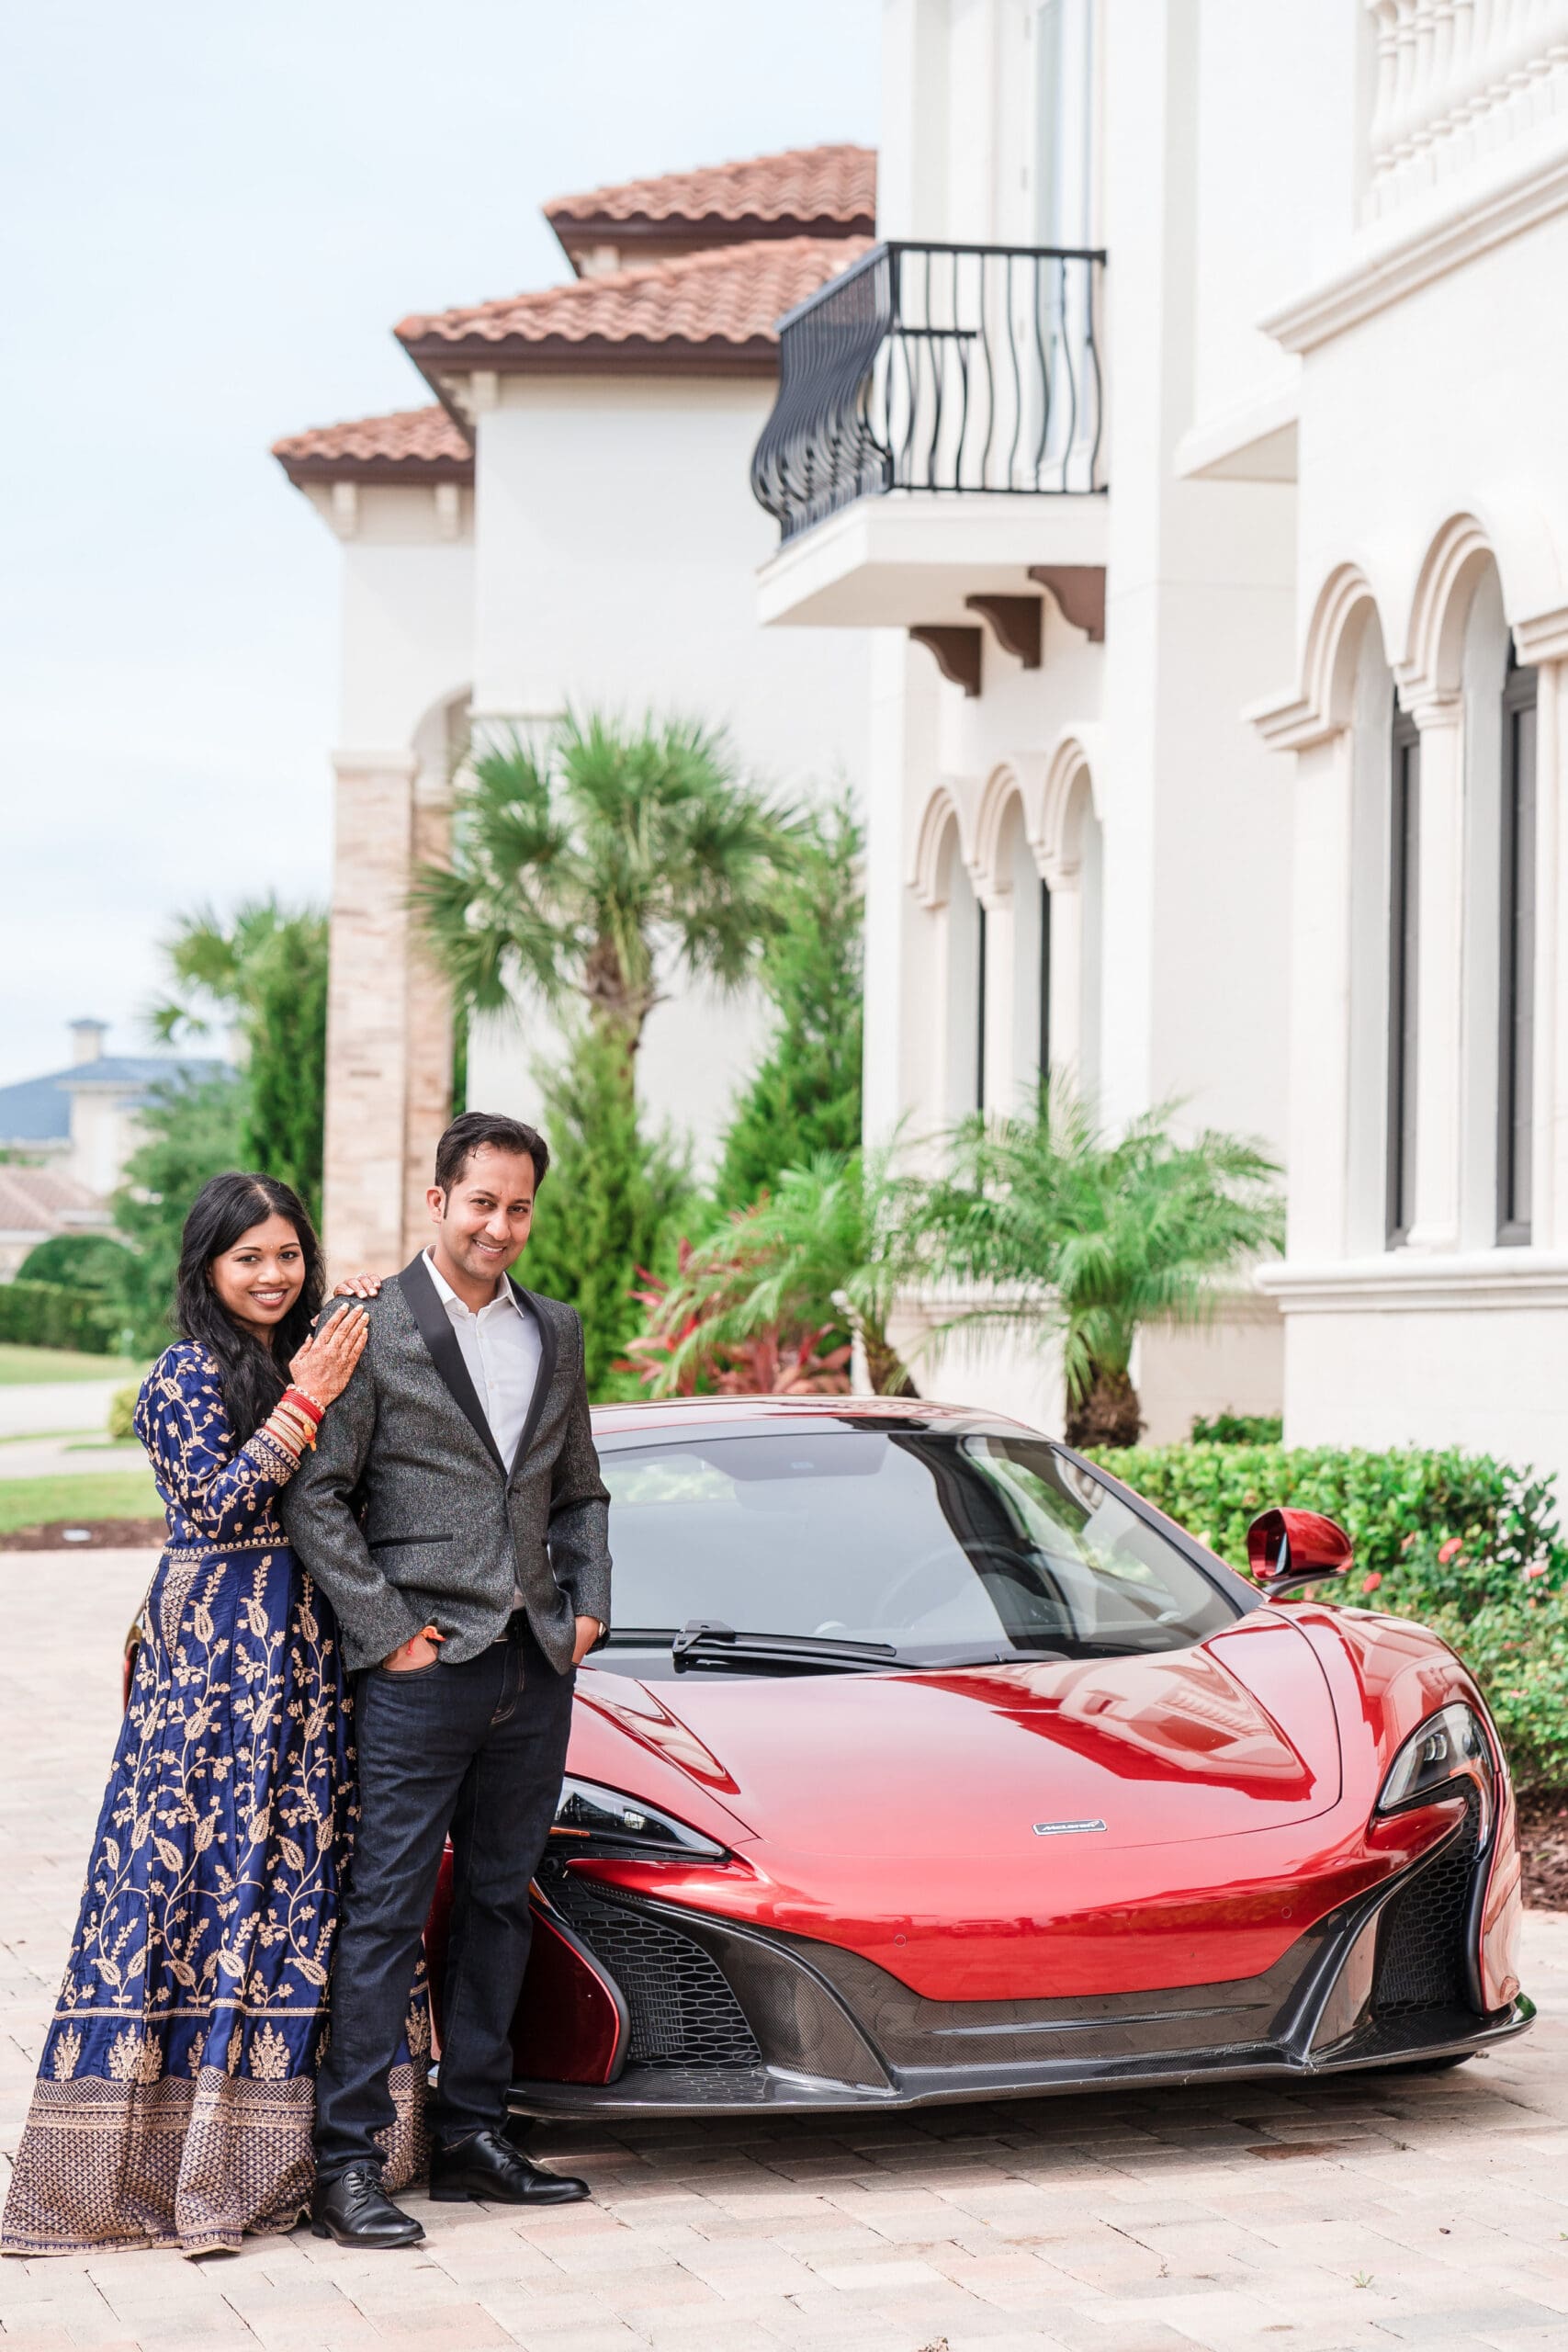 Indian wedding couple standing next to a red McLaren sports car outside the venue.